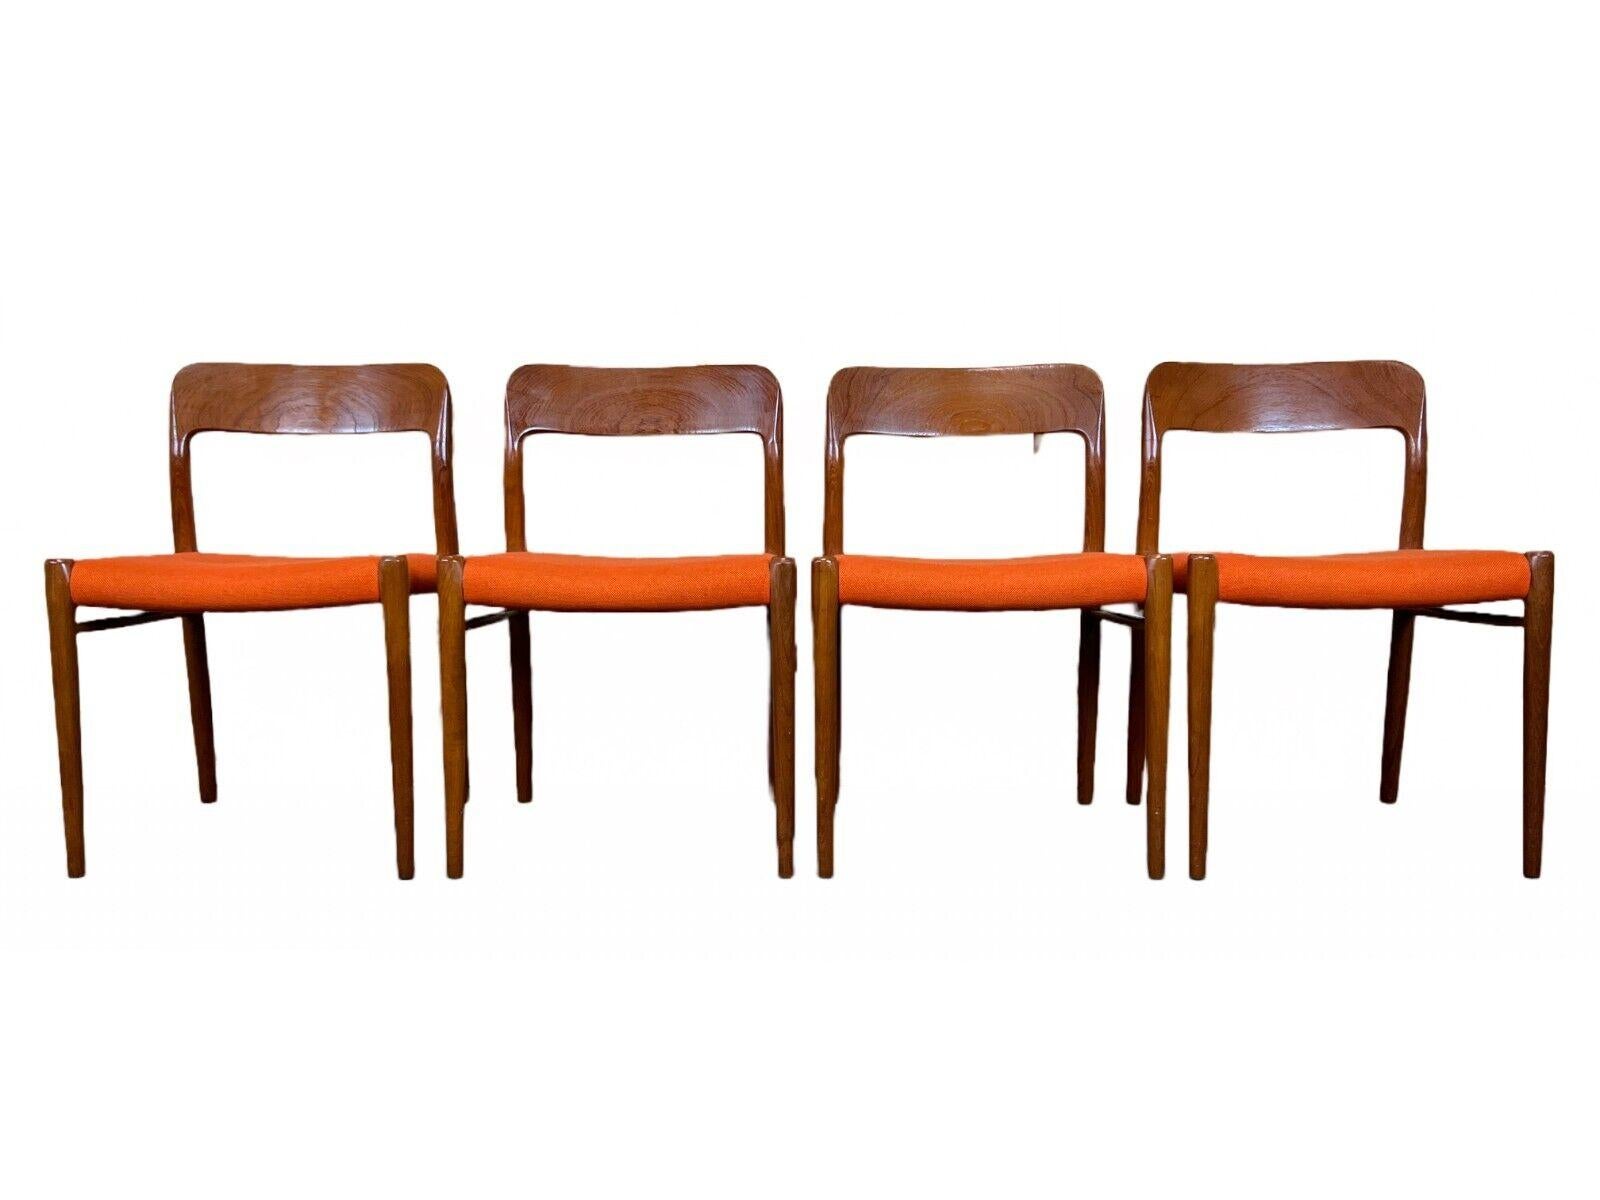 4x 60s 70s chairs teak dining chair Niels O. Möller for J.L. Moller's 60s

Object: 4x chair

Manufacturer: J.L. Mollers

Condition: good - vintage

Age: around 1960-1970

Dimensions:

Width = 51cm
Depth = 49cm
Height = 74cm
Seat